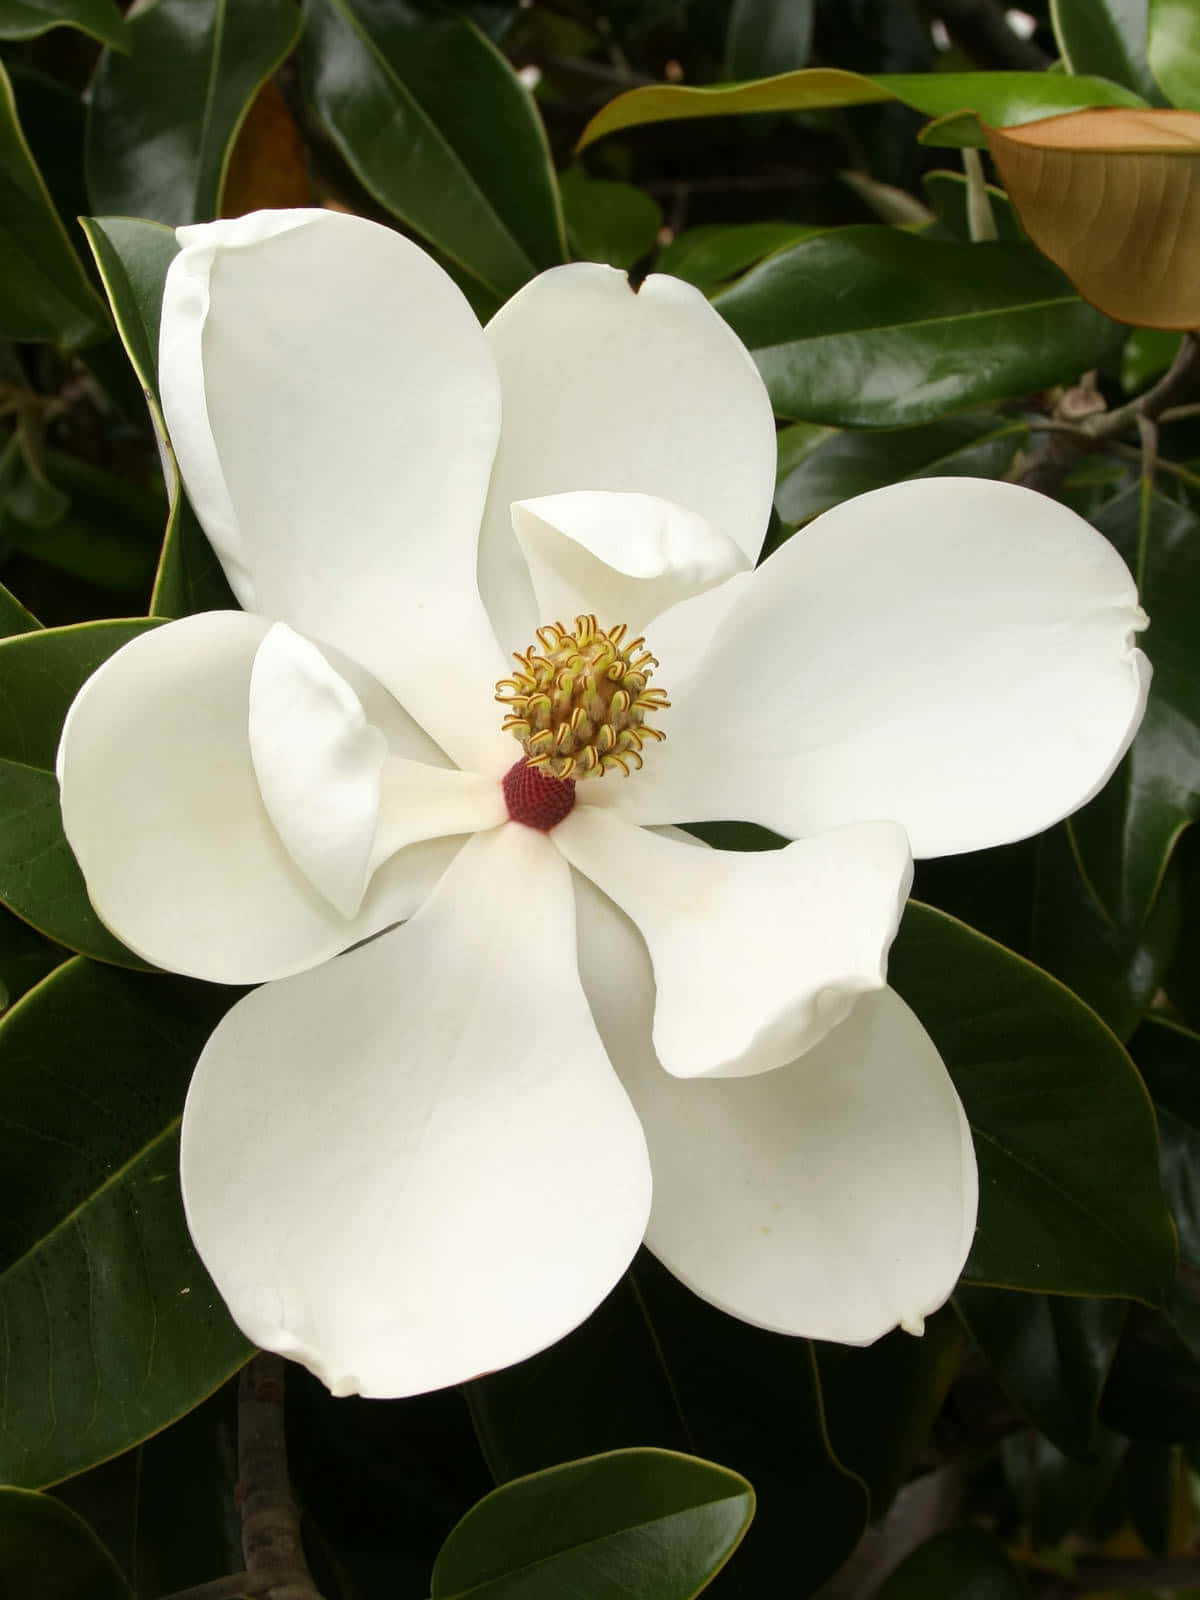 A Magnolia flower blooming in all its beauty